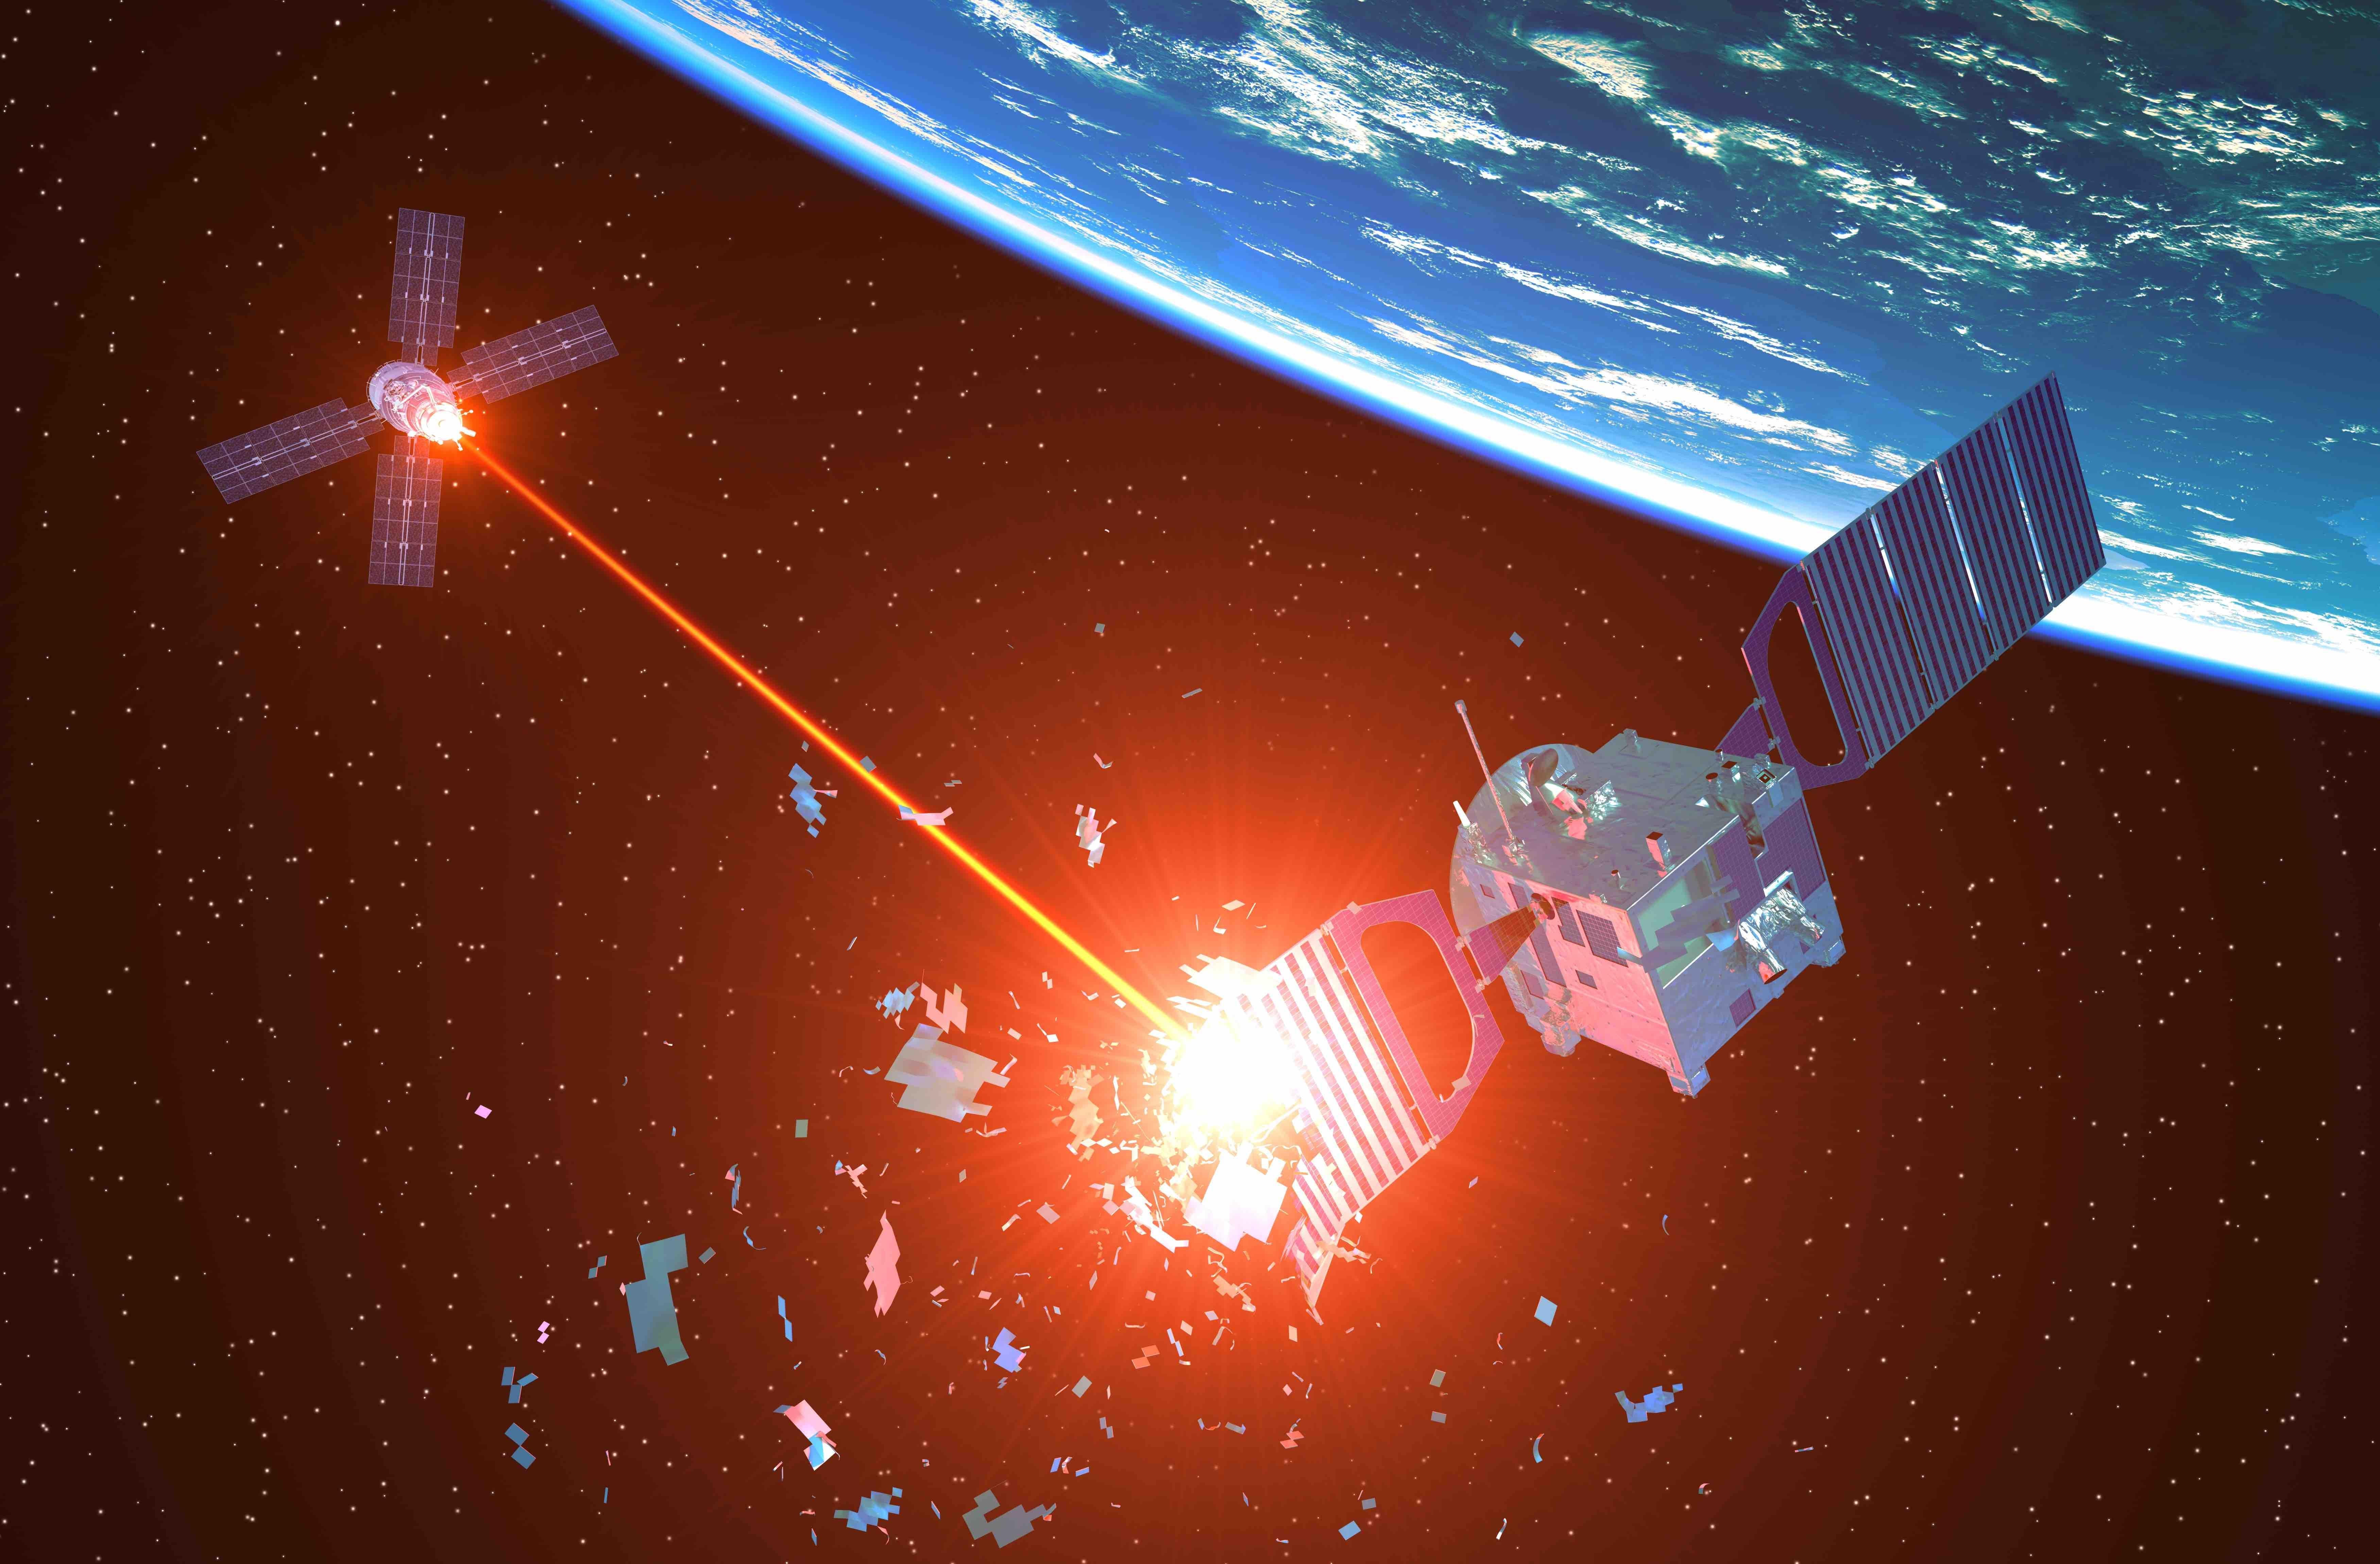 Laser Weapon Destroys Satellite In Outer Space - stock photo